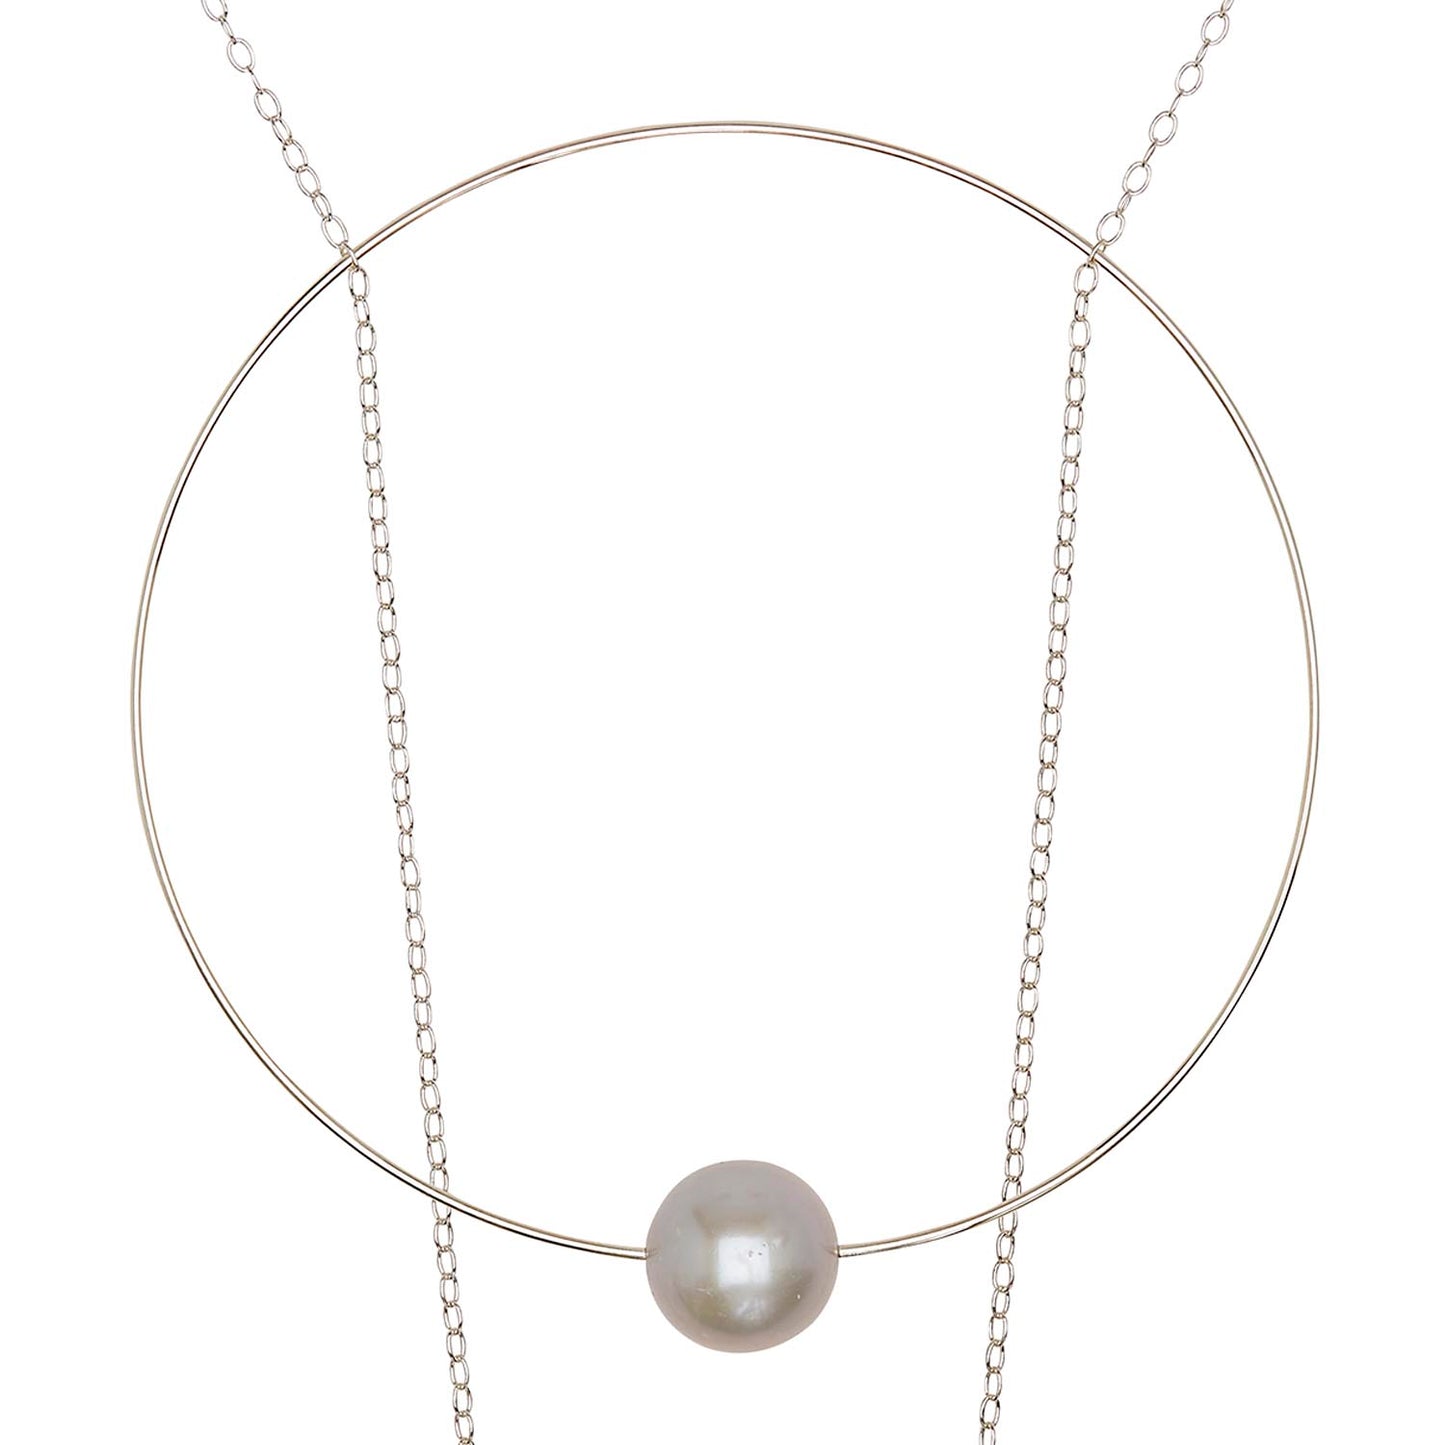 Large Circle Chain Pendant Necklace with Grey Pearl